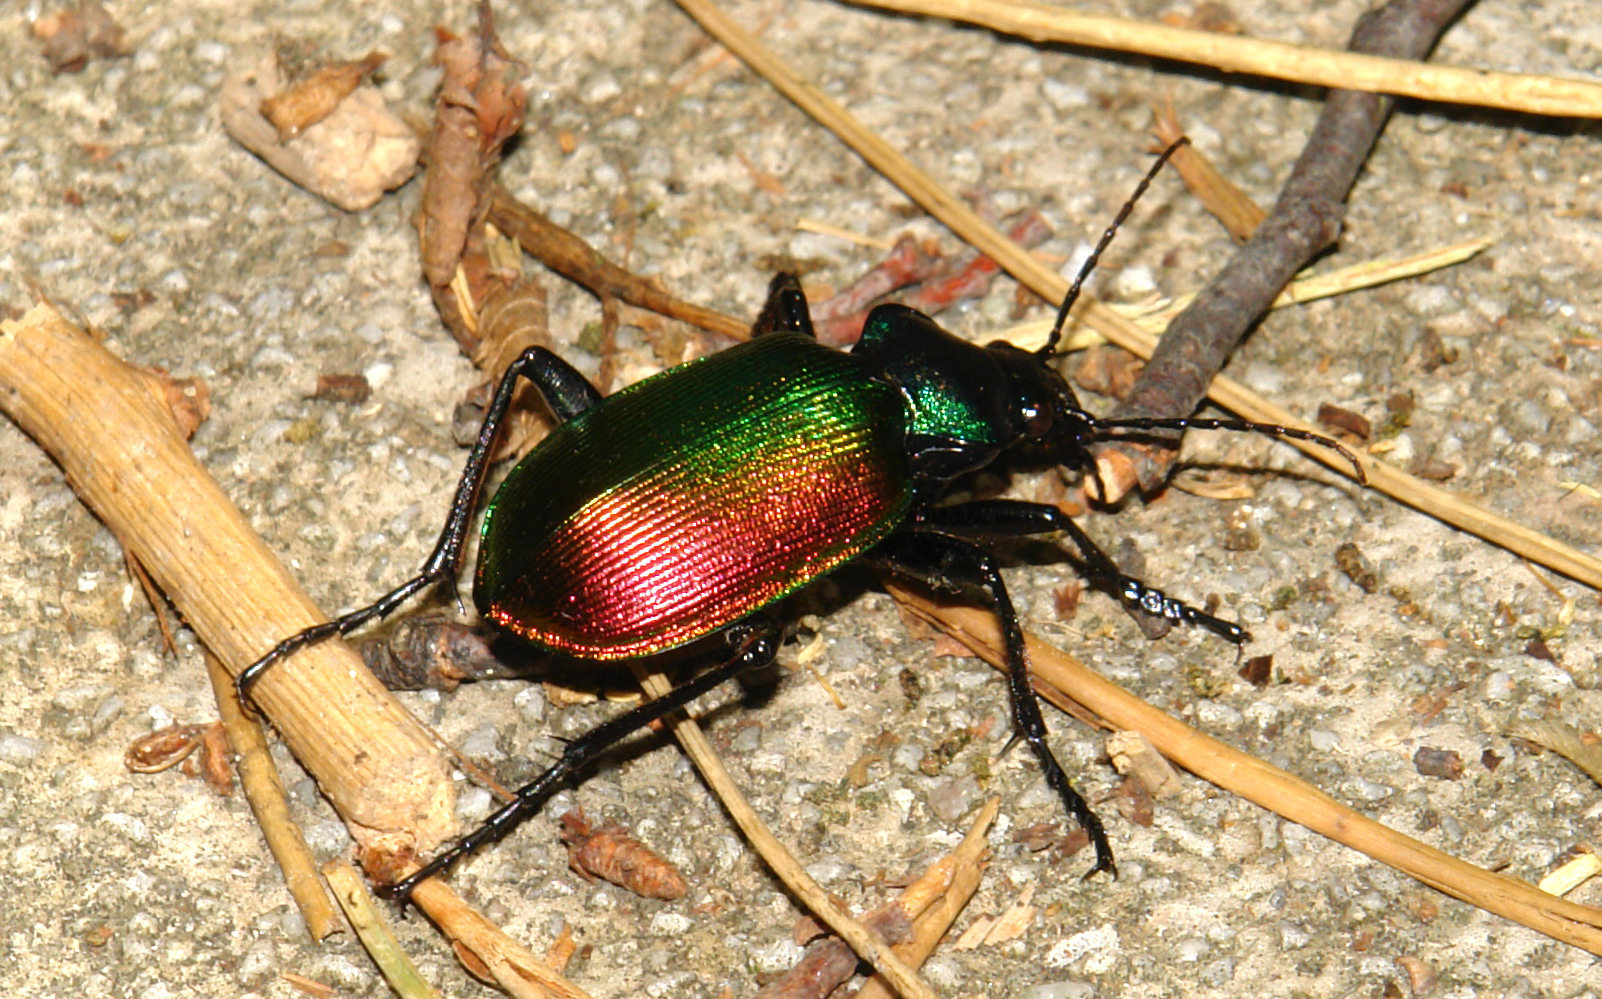 a colorful beetle walking on the ground by itself